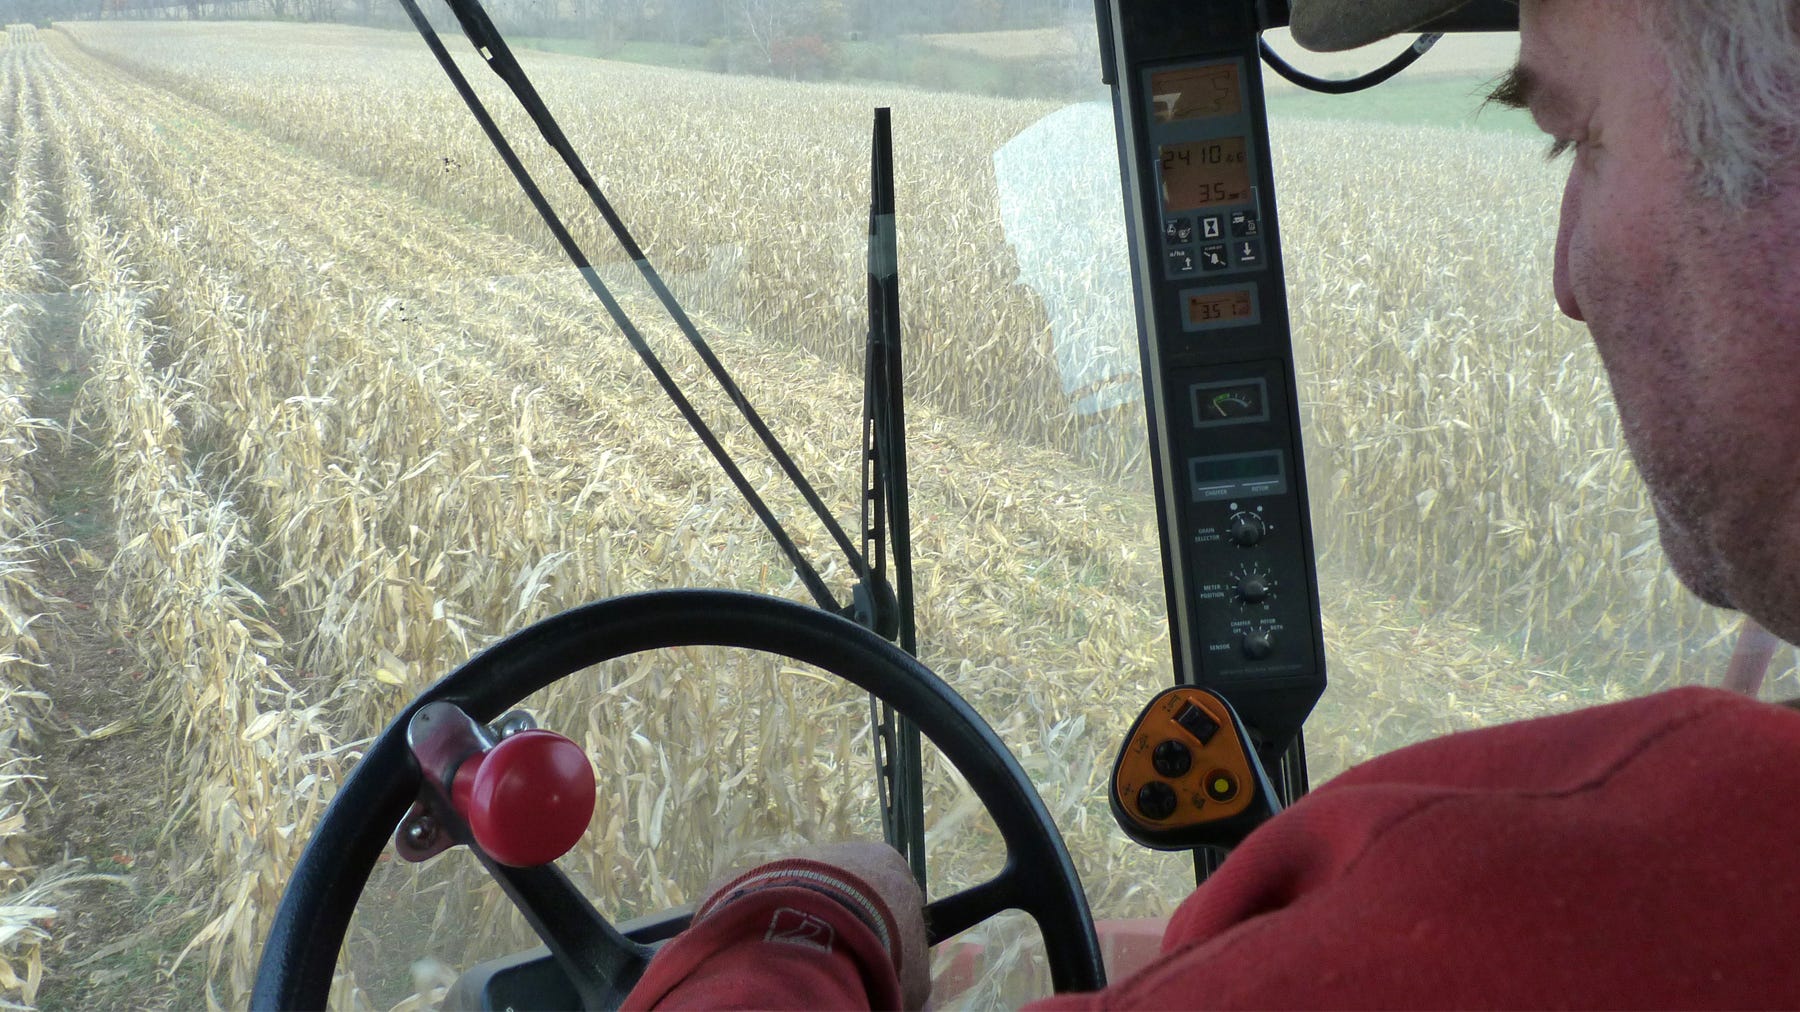 view from cab of combine as it harvest corn